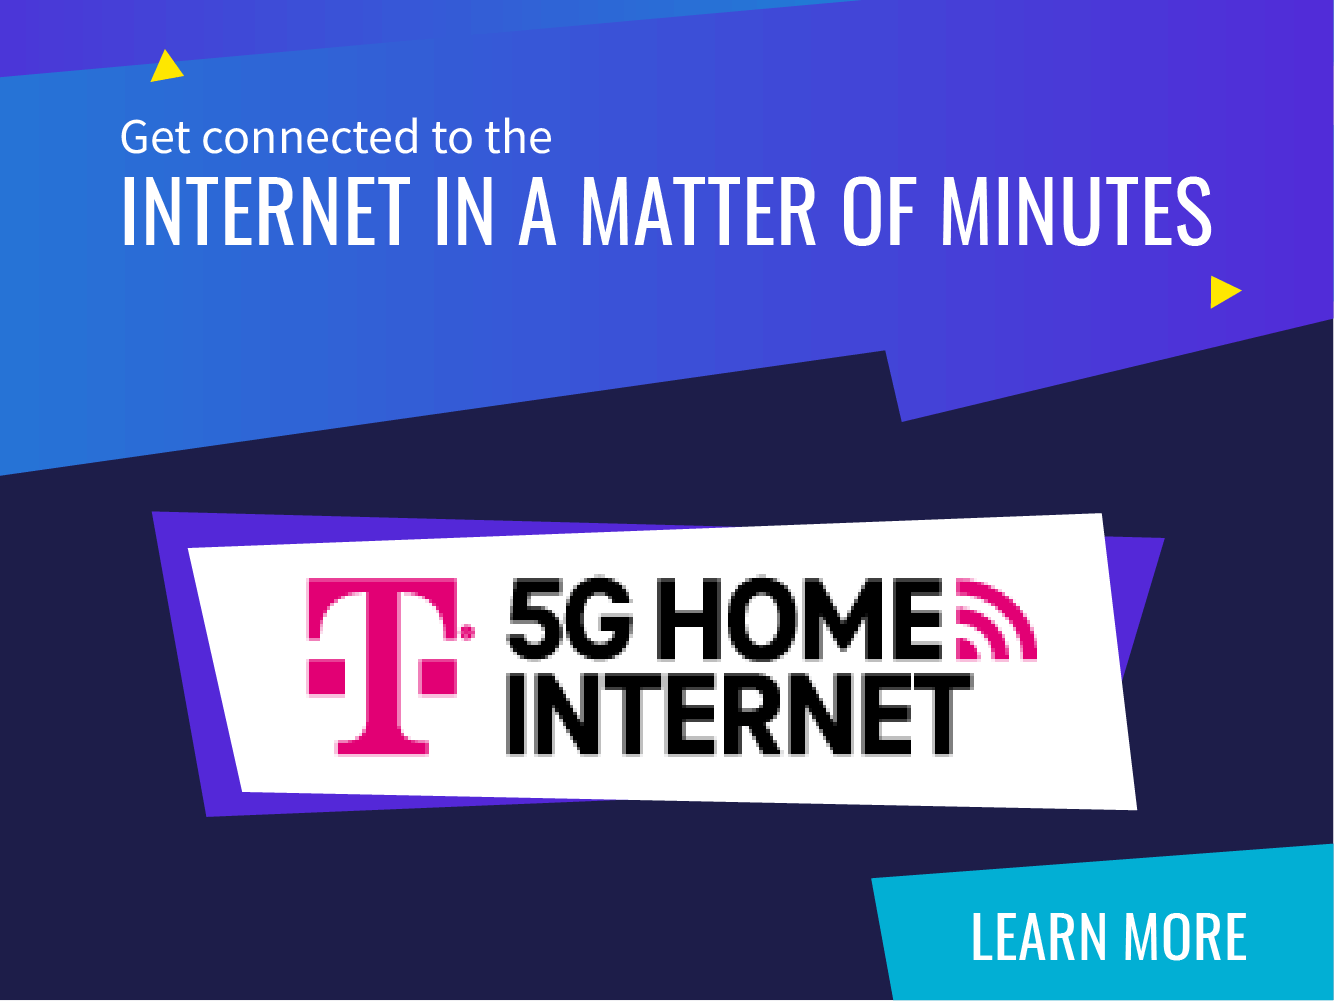 Get the Latest T-Mobile 5G Home Internet Offers